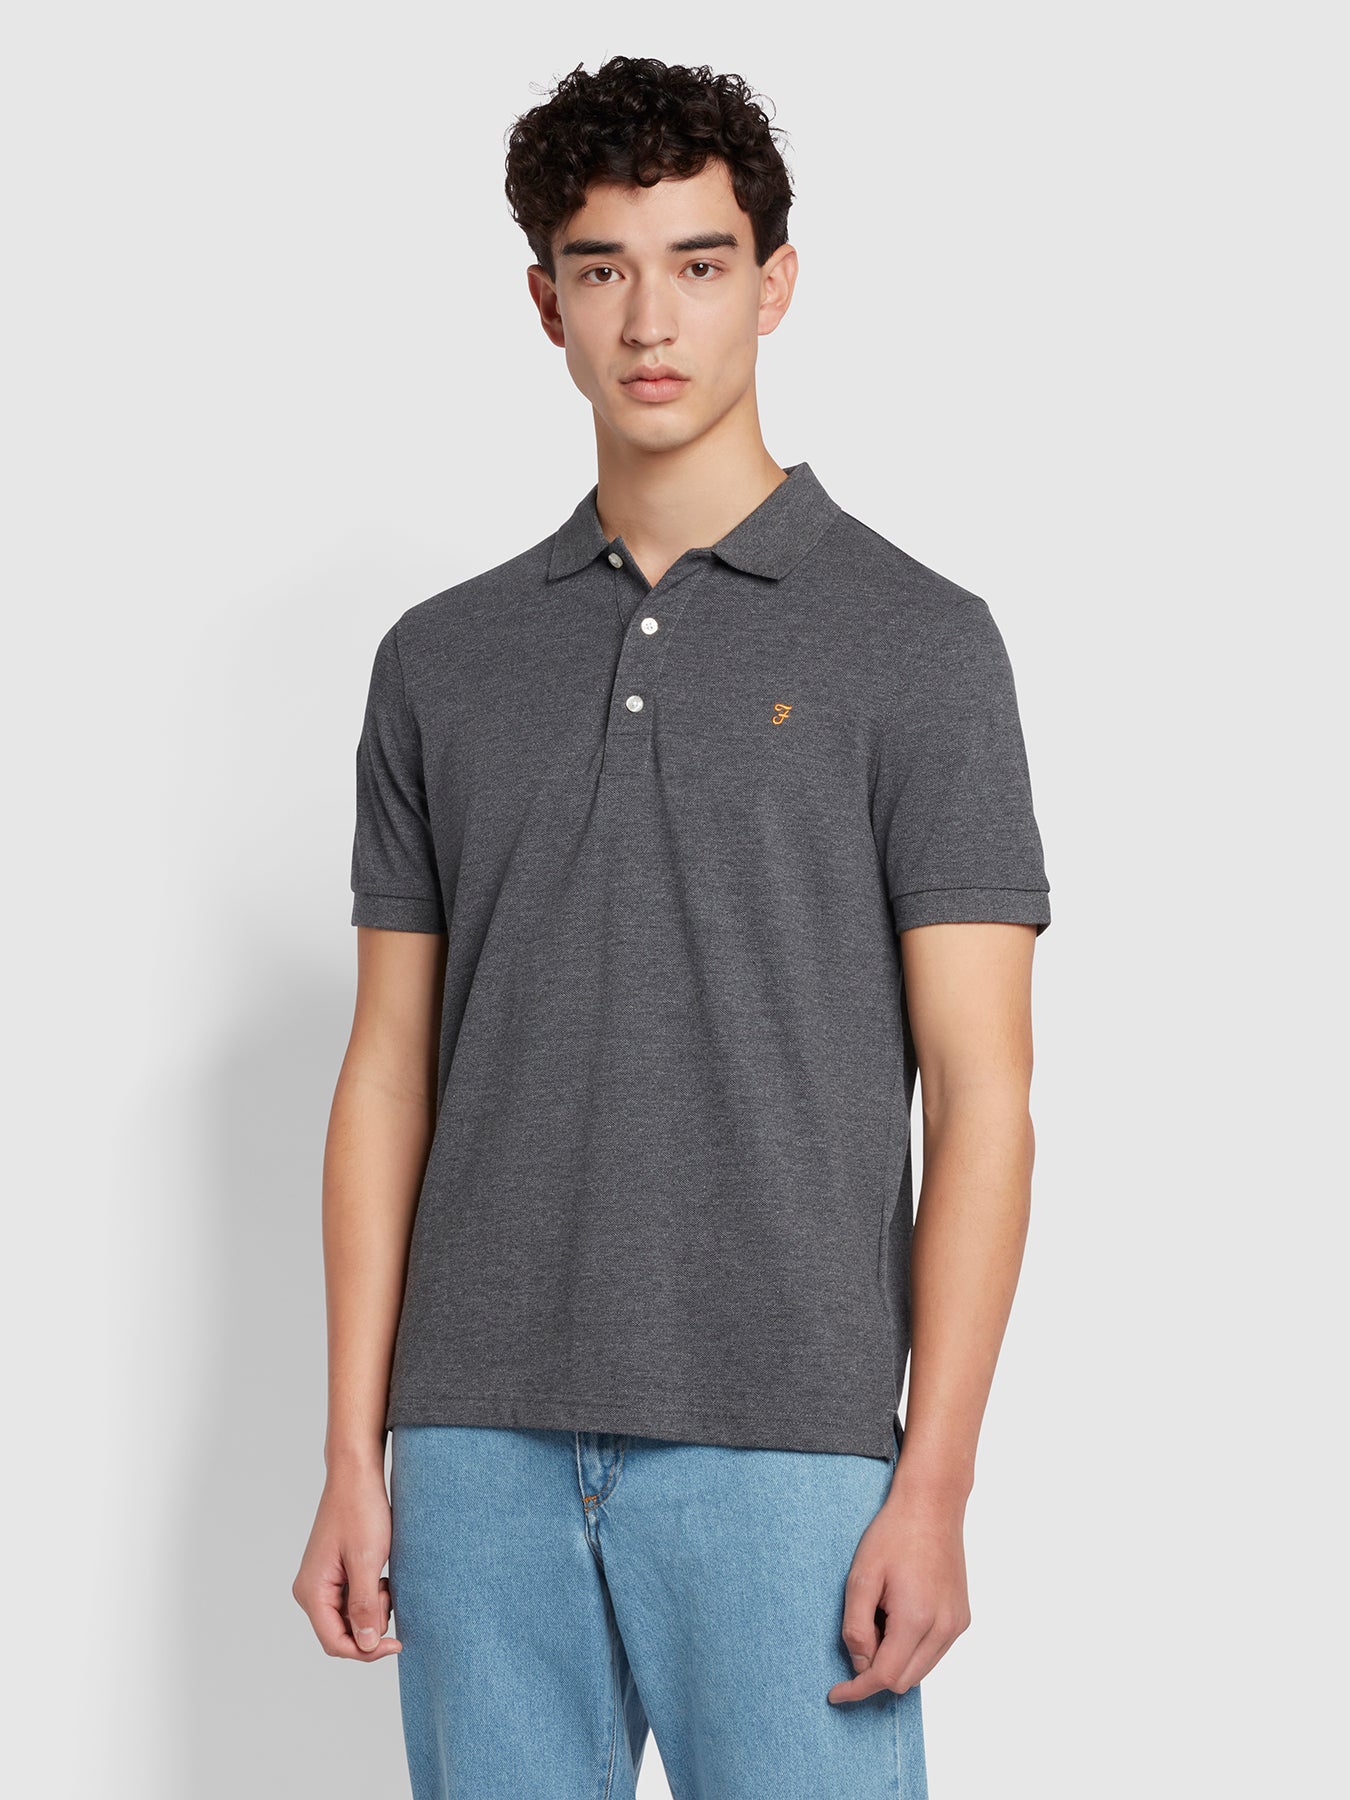 View Blanes Slim Fit Organic Cotton Polo Top In Farah Grey Marl information